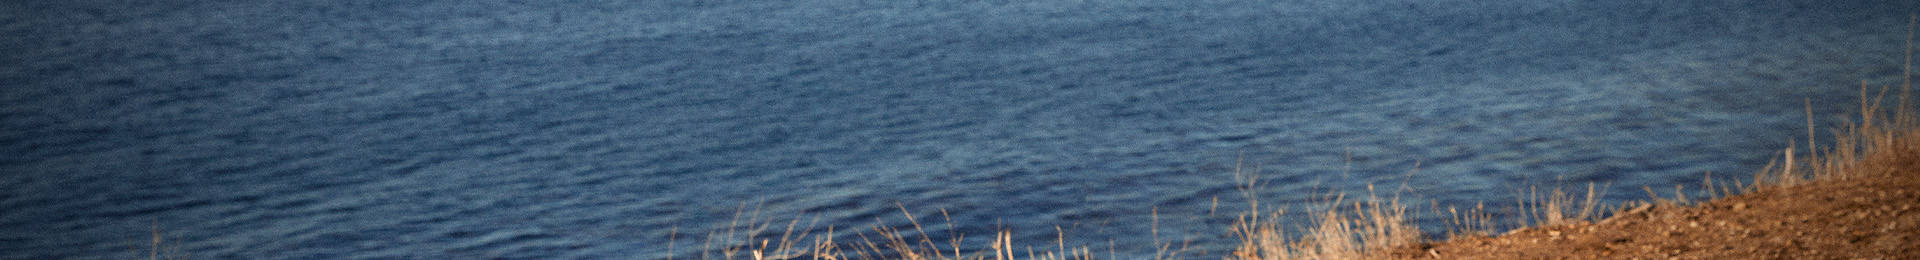 Image of blue rippling water with golden grass, with white text reading MEMORIAL DAY SALE EXTRA 25% OFF in white text.